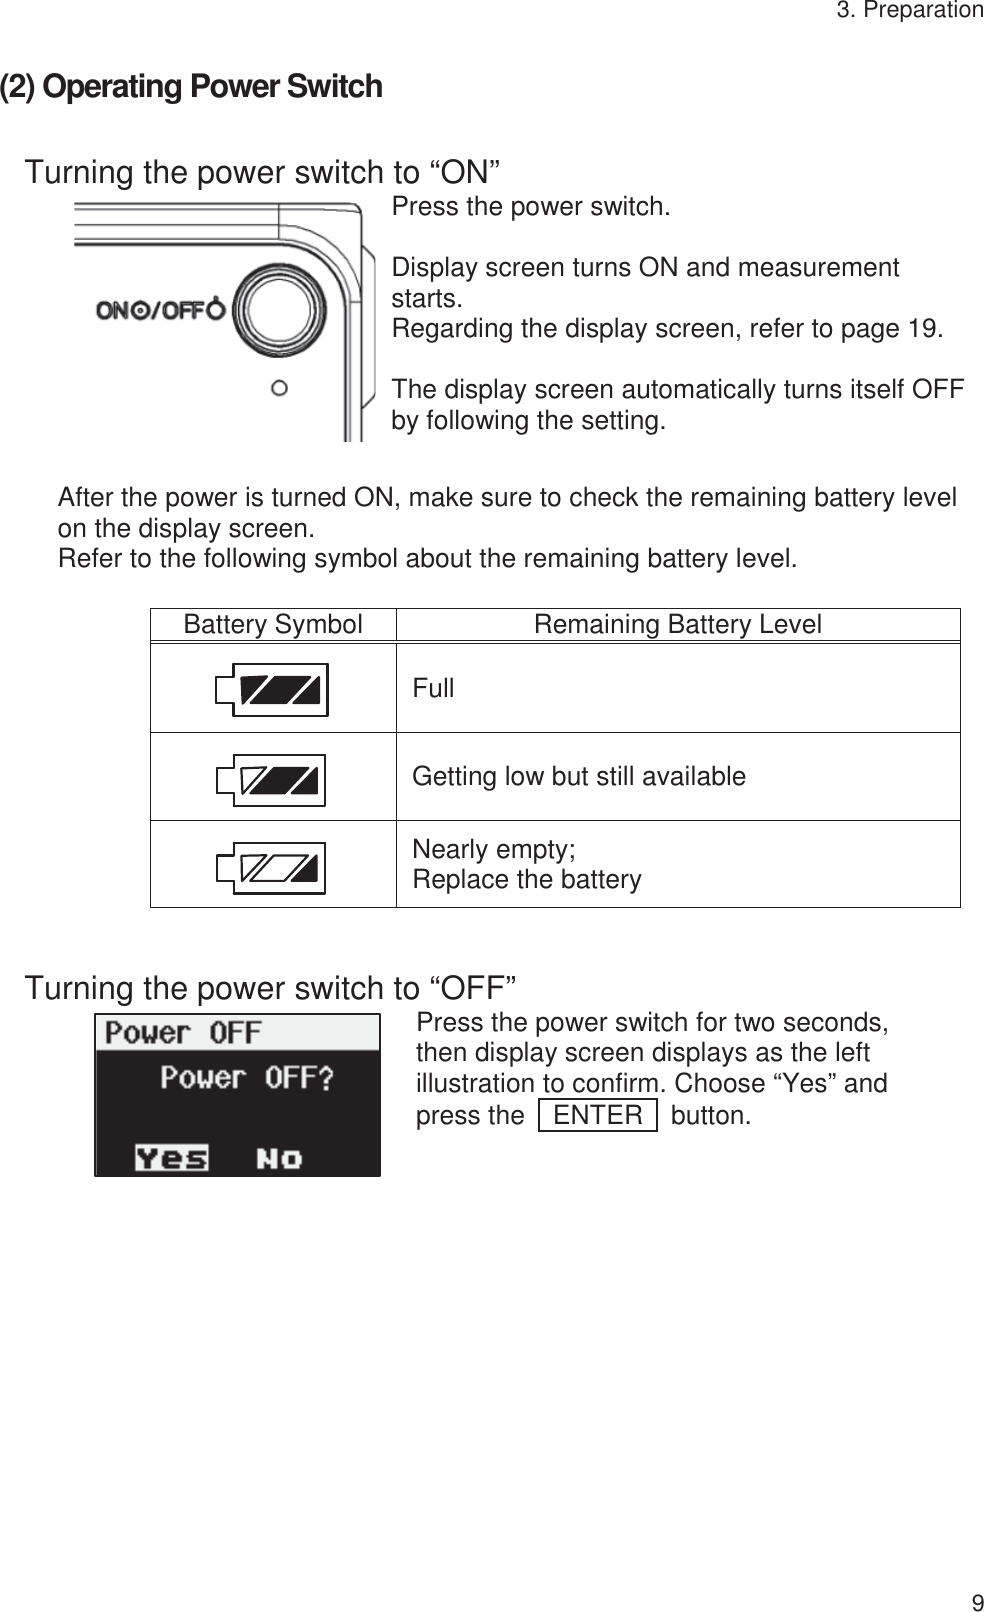 3. Preparation 9 (2) Operating Power Switch Turning the power switch to “ON” Press the power switch.  Display screen turns ON and measurement starts. Regarding the display screen, refer to page 19.  The display screen automatically turns itself OFF by following the setting. After the power is turned ON, make sure to check the remaining battery level on the display screen. Refer to the following symbol about the remaining battery level. Battery SymbolRemaining Battery LevelFullGetting low but still availableNearly empty; Replace the battery  Turning the power switch to “OFF” Press the power switch for two seconds, then display screen displays as the left illustration to confirm. Choose “Yes” and press the  ENTER  button.   